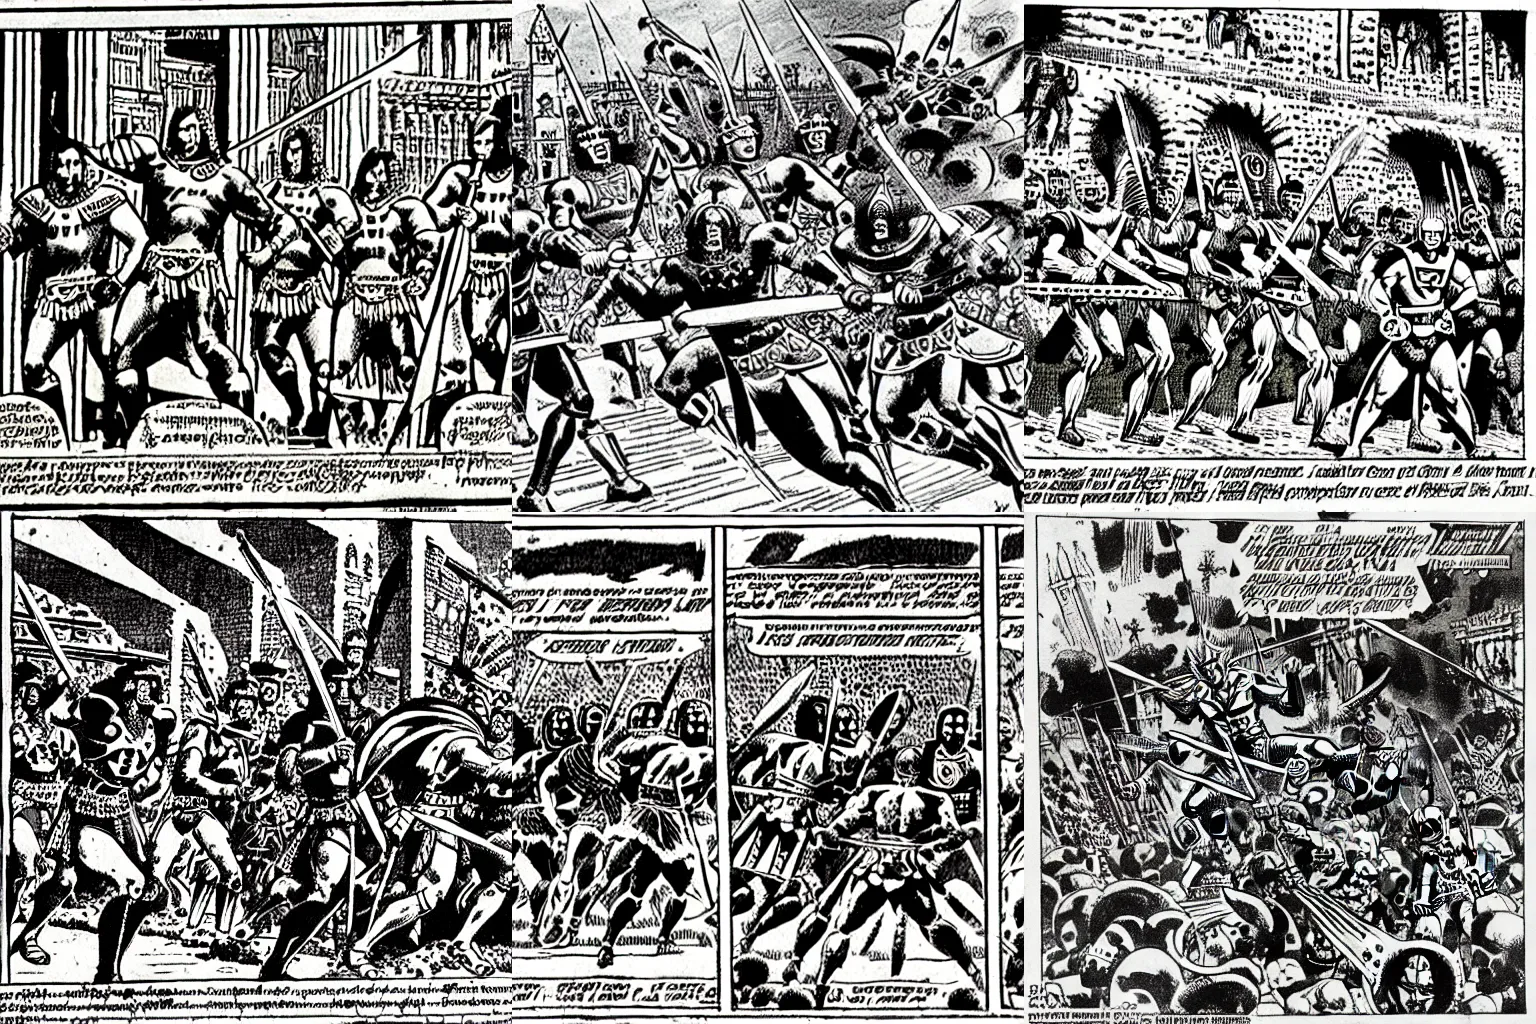 Prompt: a comicbook scene of Aztecs warriors conquering Madrid in 1492 at King Ferdinand's Palace comicbook illustration by Jack Kirby